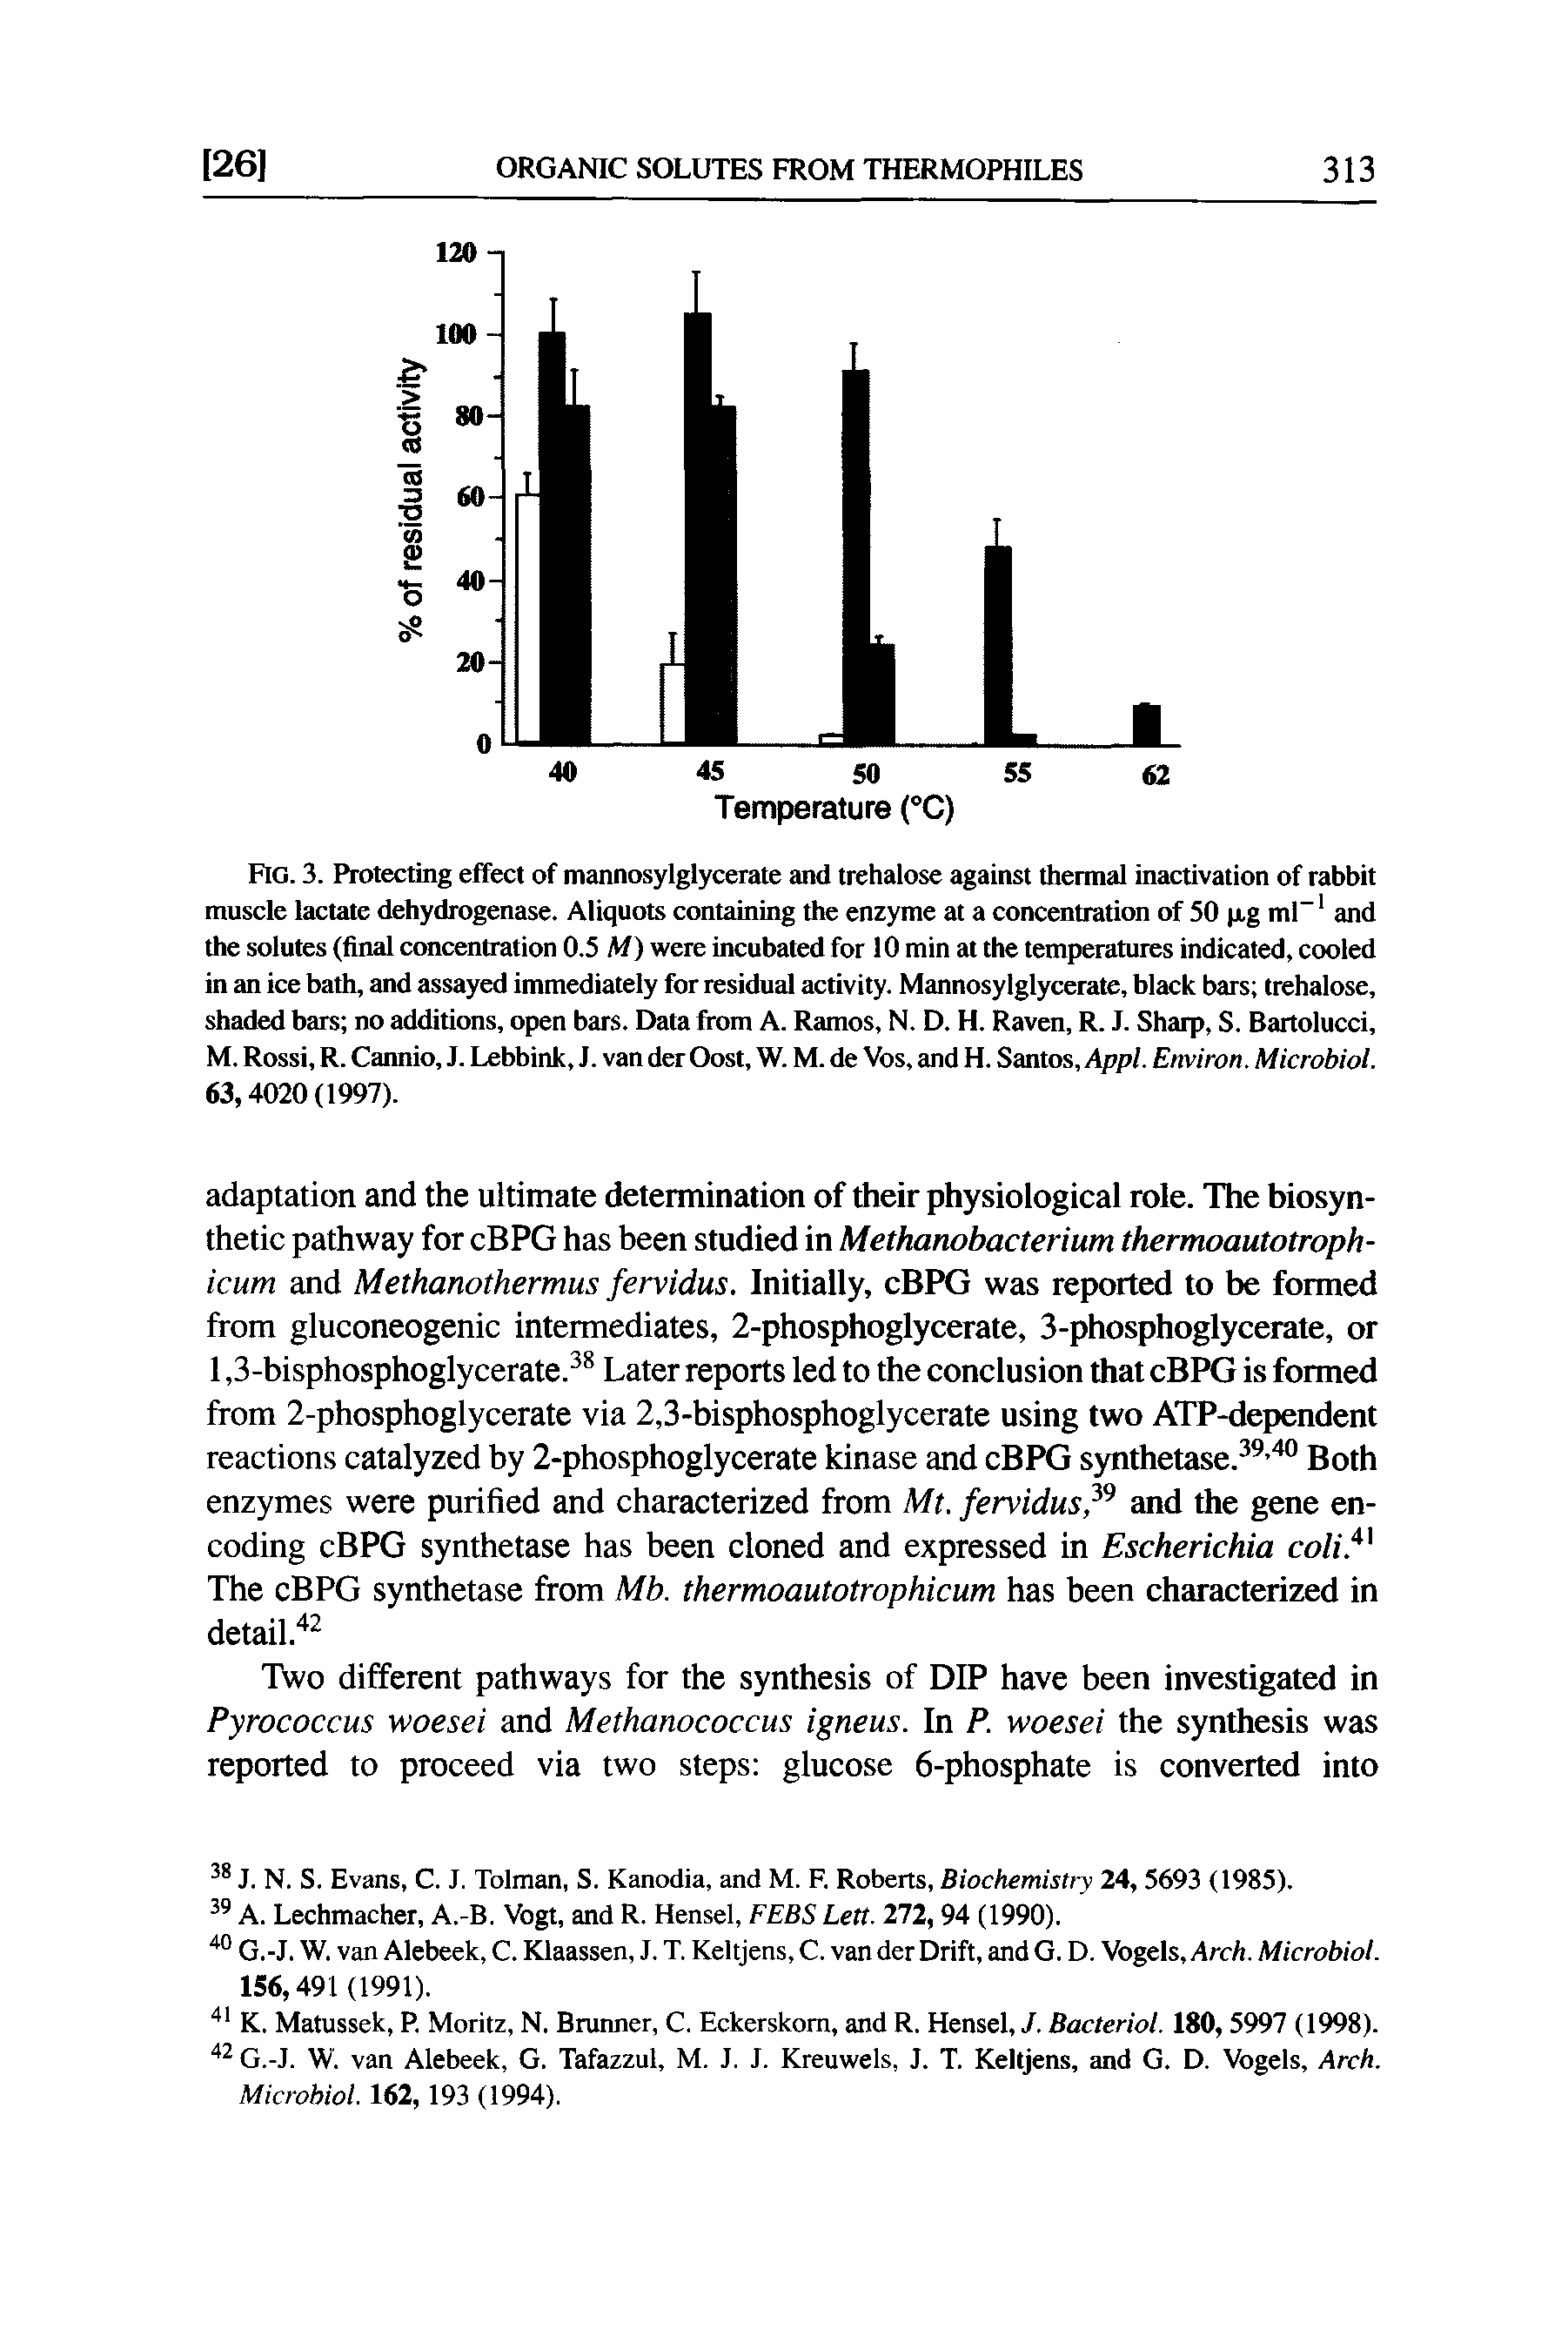 Fig. 3. Protecting effect of mannosylglycerate and trehalose against thermal inactivation of rabbit muscle lactate dehydrogenase. Aliquots containing the enzyme at a concentration of SO (ig ml and the solutes (final concentration 0.5 M) were incubated for 10 min at the temperatures indicated, cooled in an ice bath, and assayed immediately for residual activity. Mannosylglycerate, black bars trehalose, shaded bars no additions, open bars. Data from A. Ramos, N. D. H. Raven, R. J. Sharp, S. Bartolucci, M. Rossi, R. Cannio, J. Lebbink, J. van der Oost, W. M. de Vos, and H. Santos, Appl. Environ. Microbiol. 63,4020 (1997).